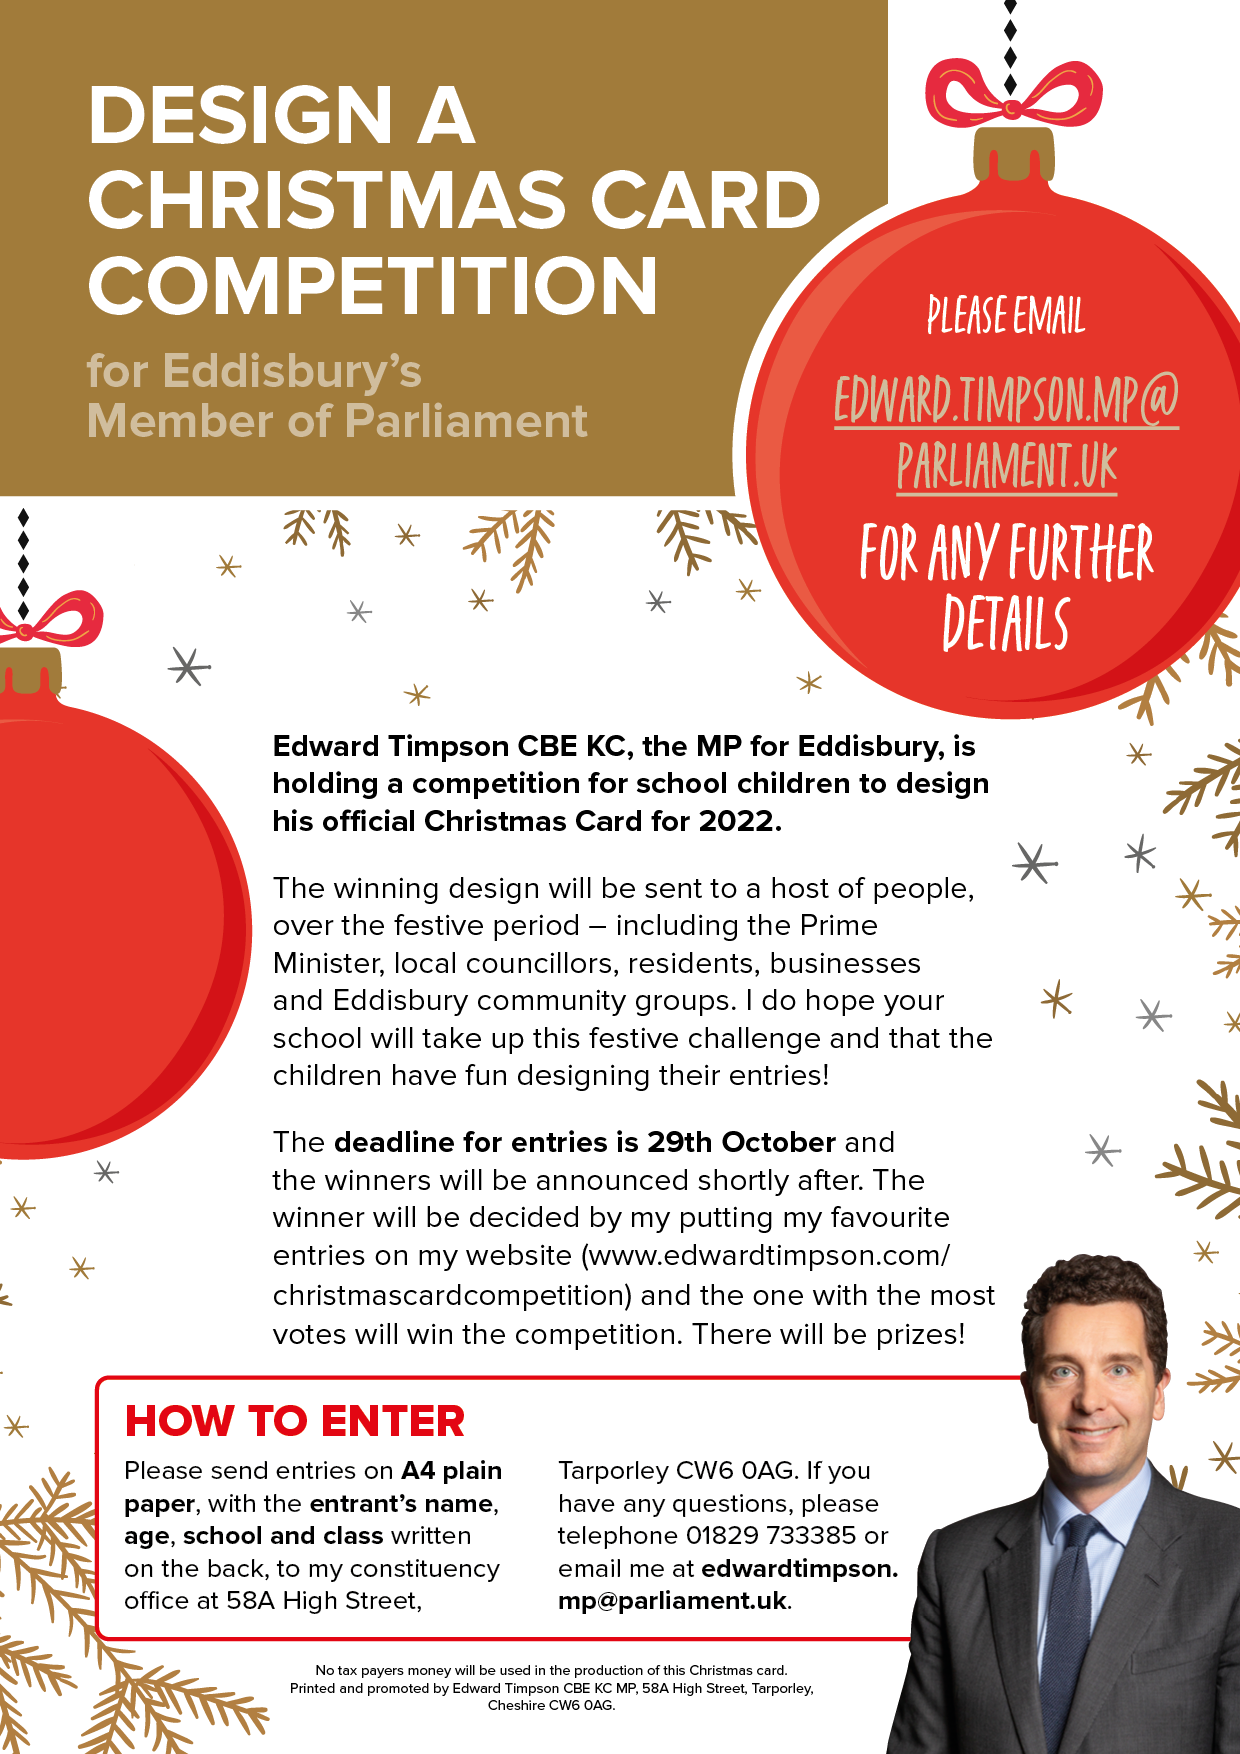 Edward Timpson's 2022 Christmas Card Competition 